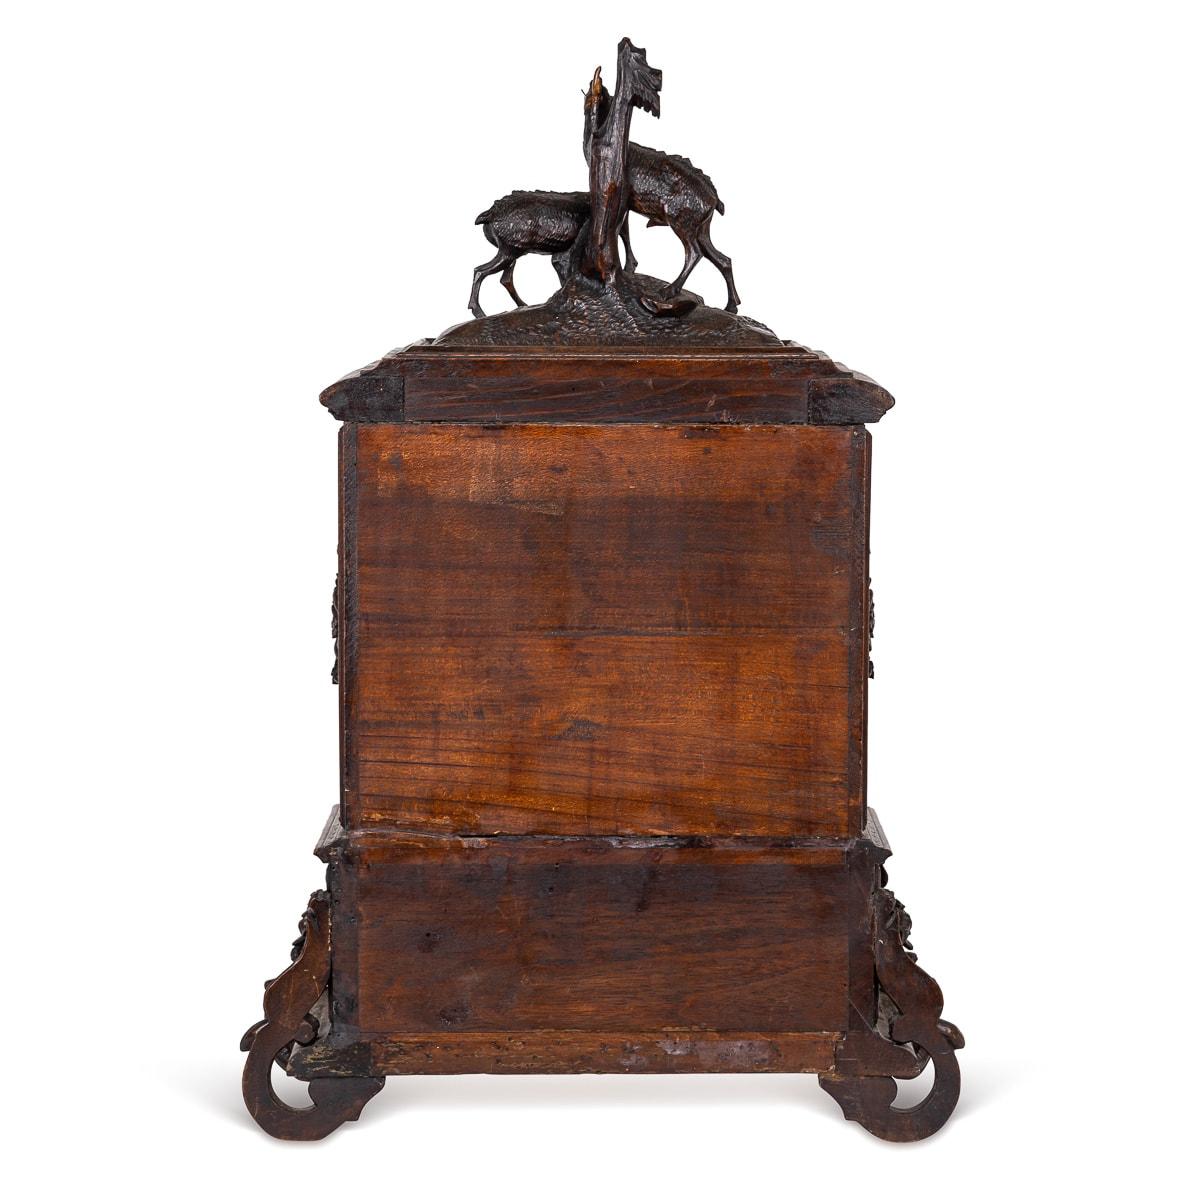 Other Antique 19th Century German Black Forest Fruitwood Humidor c.1890 For Sale